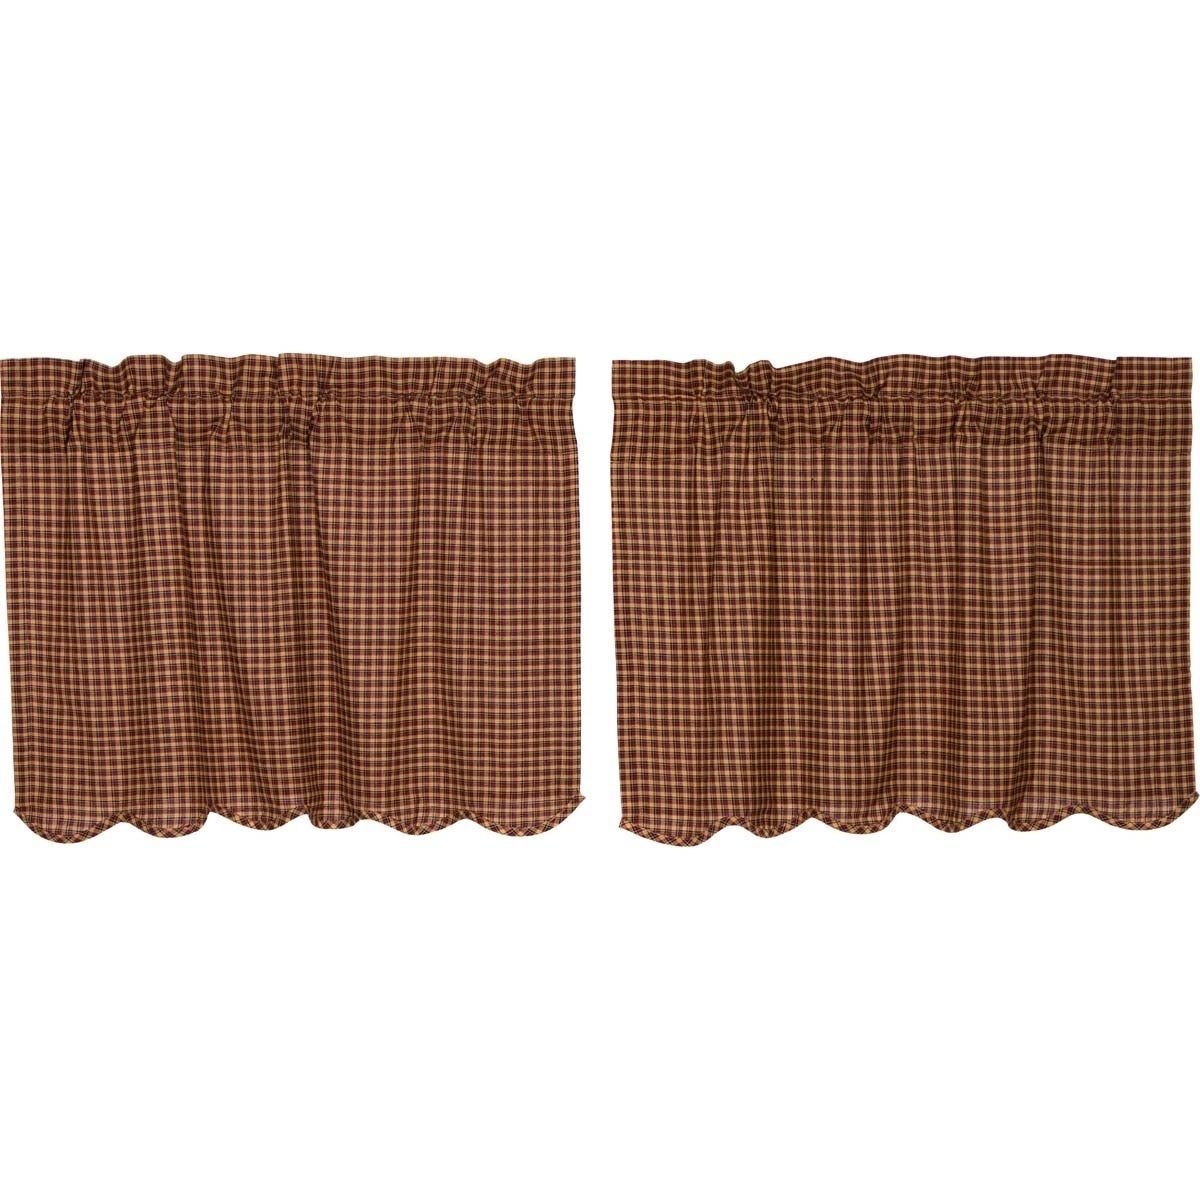 Buy Red Curtain Tiers Online At Overstock | Our Best Window With Regard To Flinders Forge 30 Inch Tiers In Garnet (View 20 of 20)